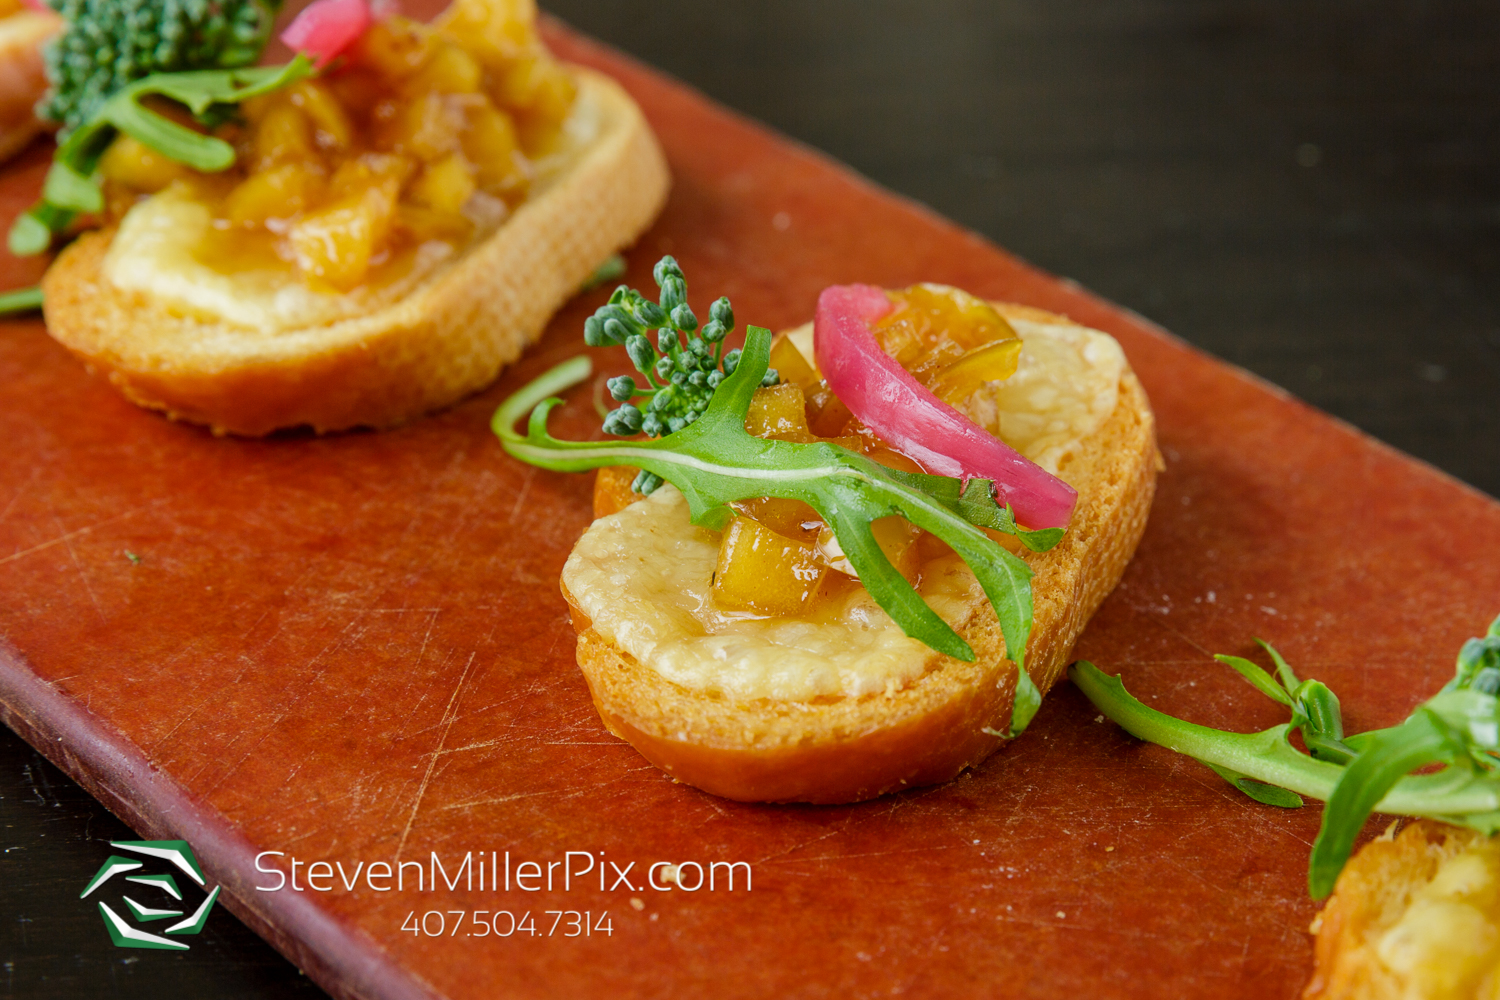 orlando catering - White Cheddar on Crostini with Sweet Apple Compote